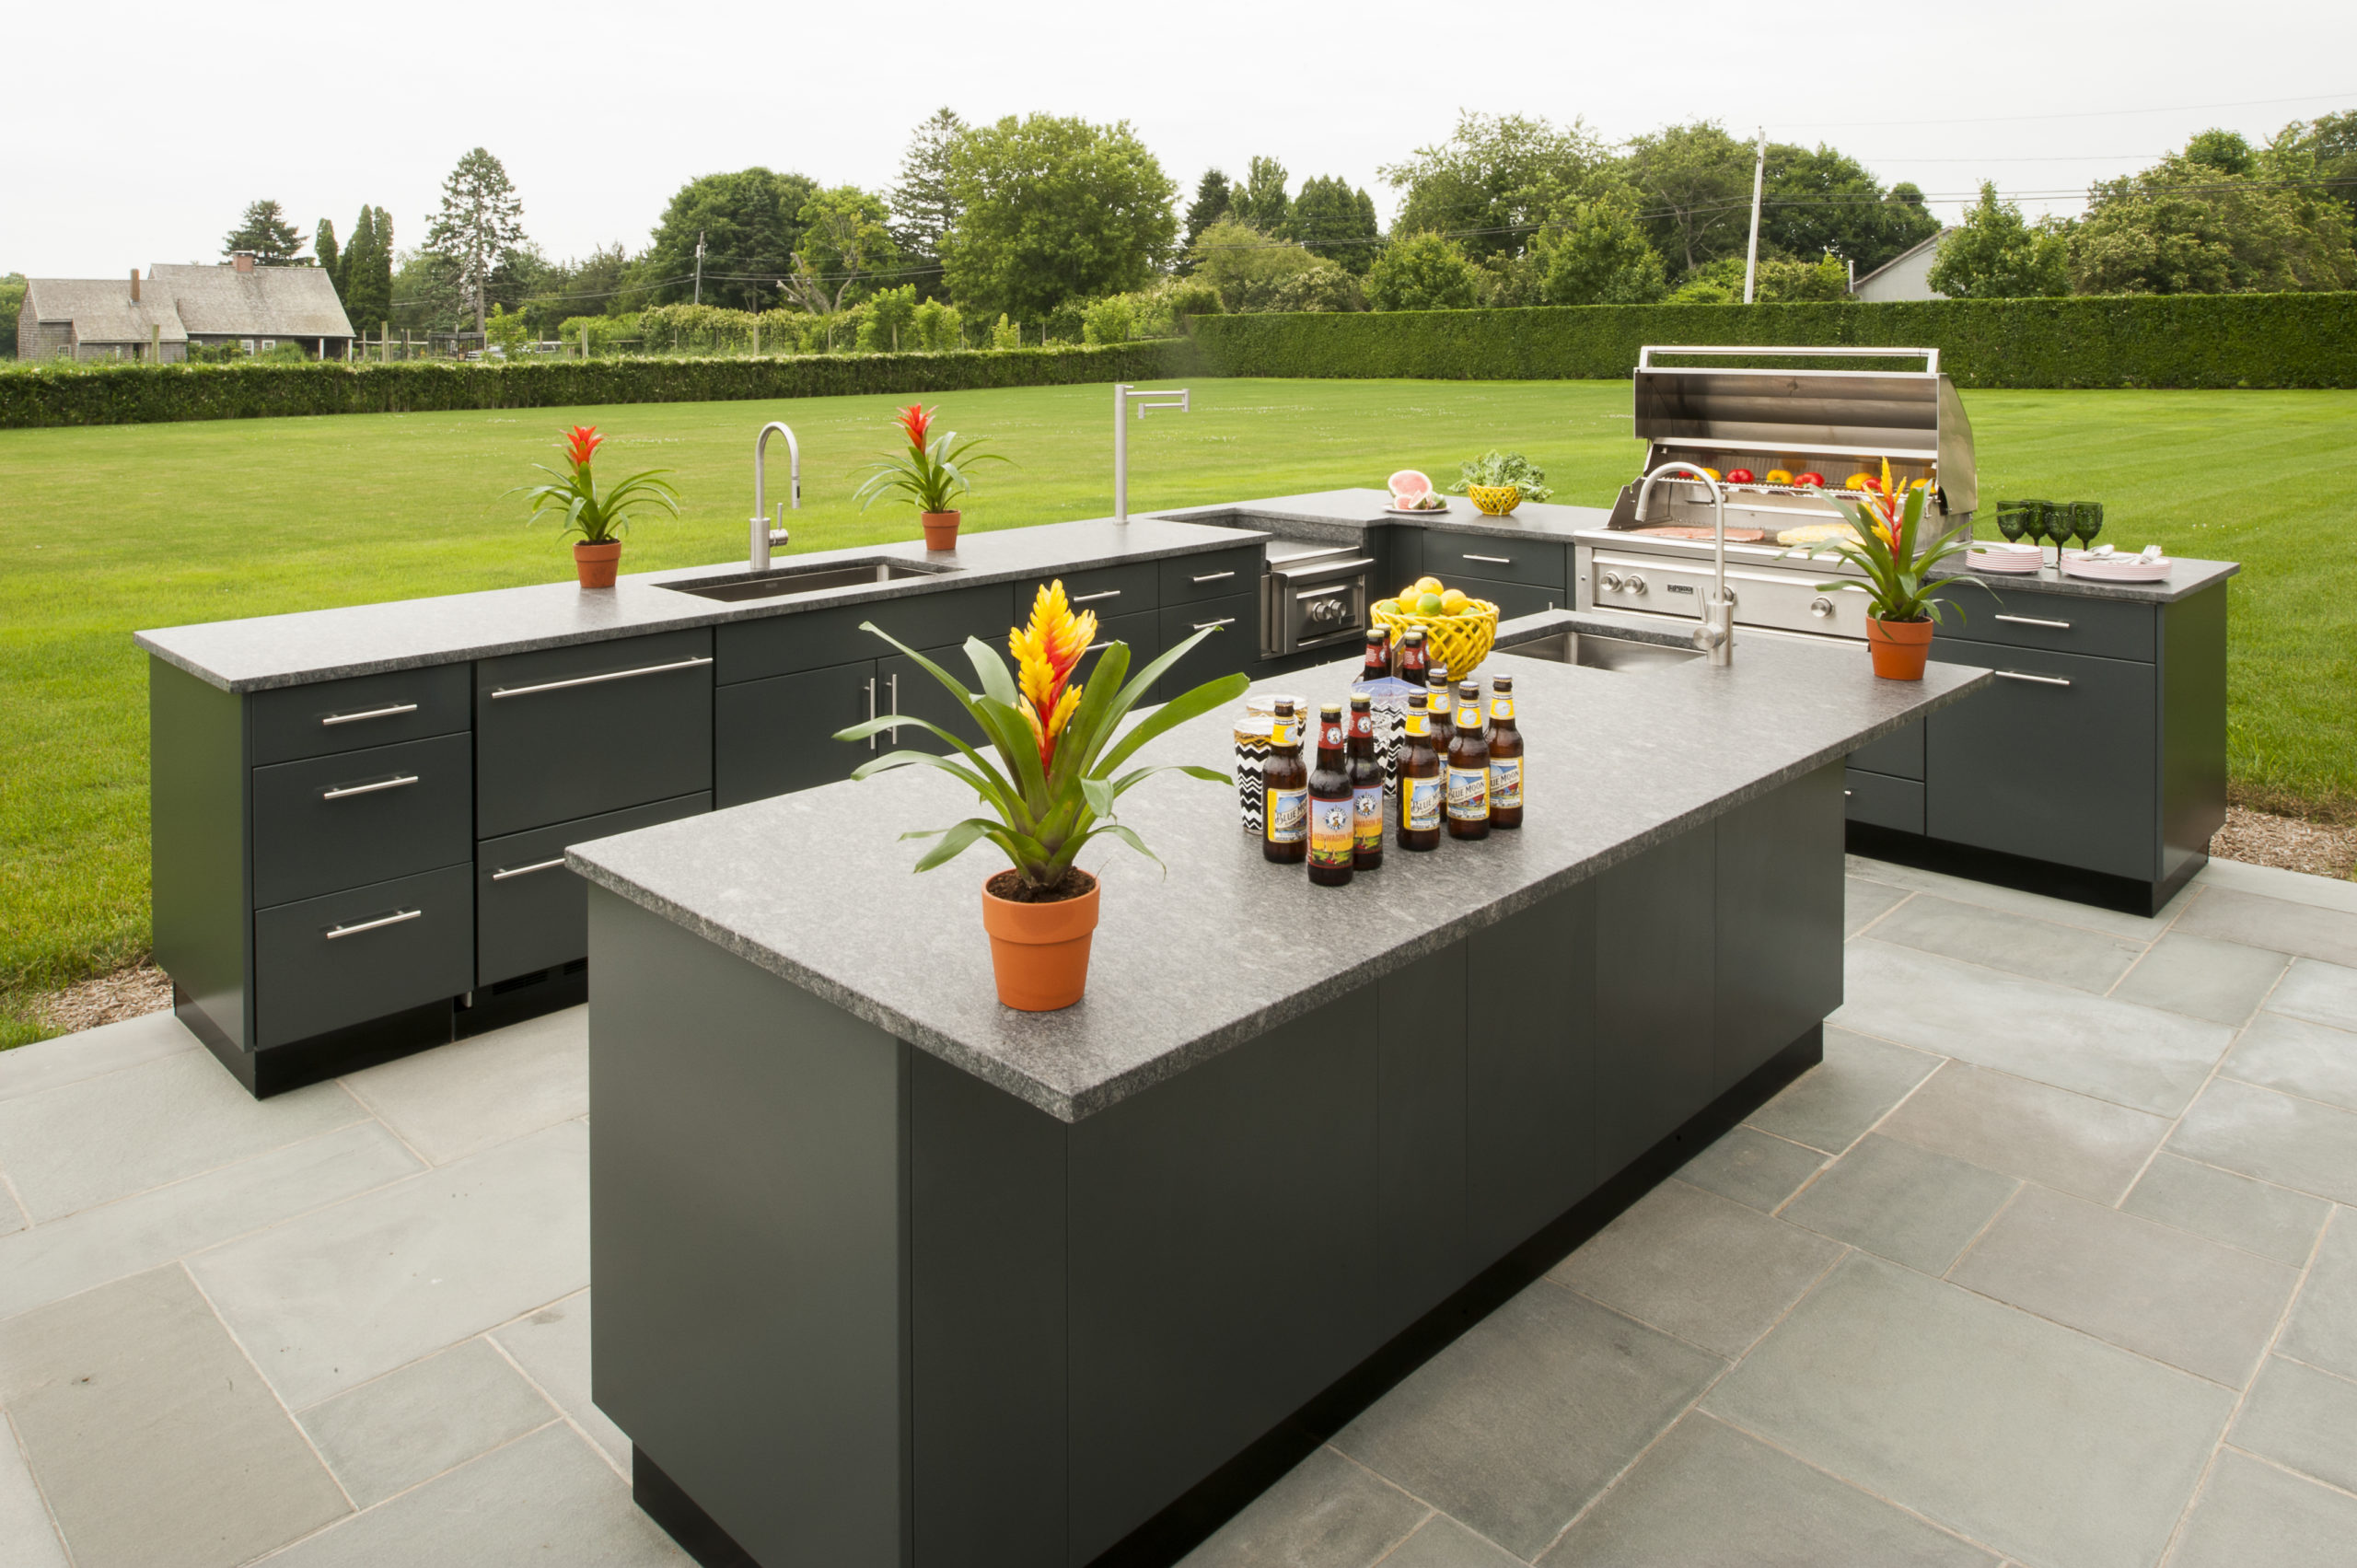 Listing The Best Countertops for Outdoor Kitchen